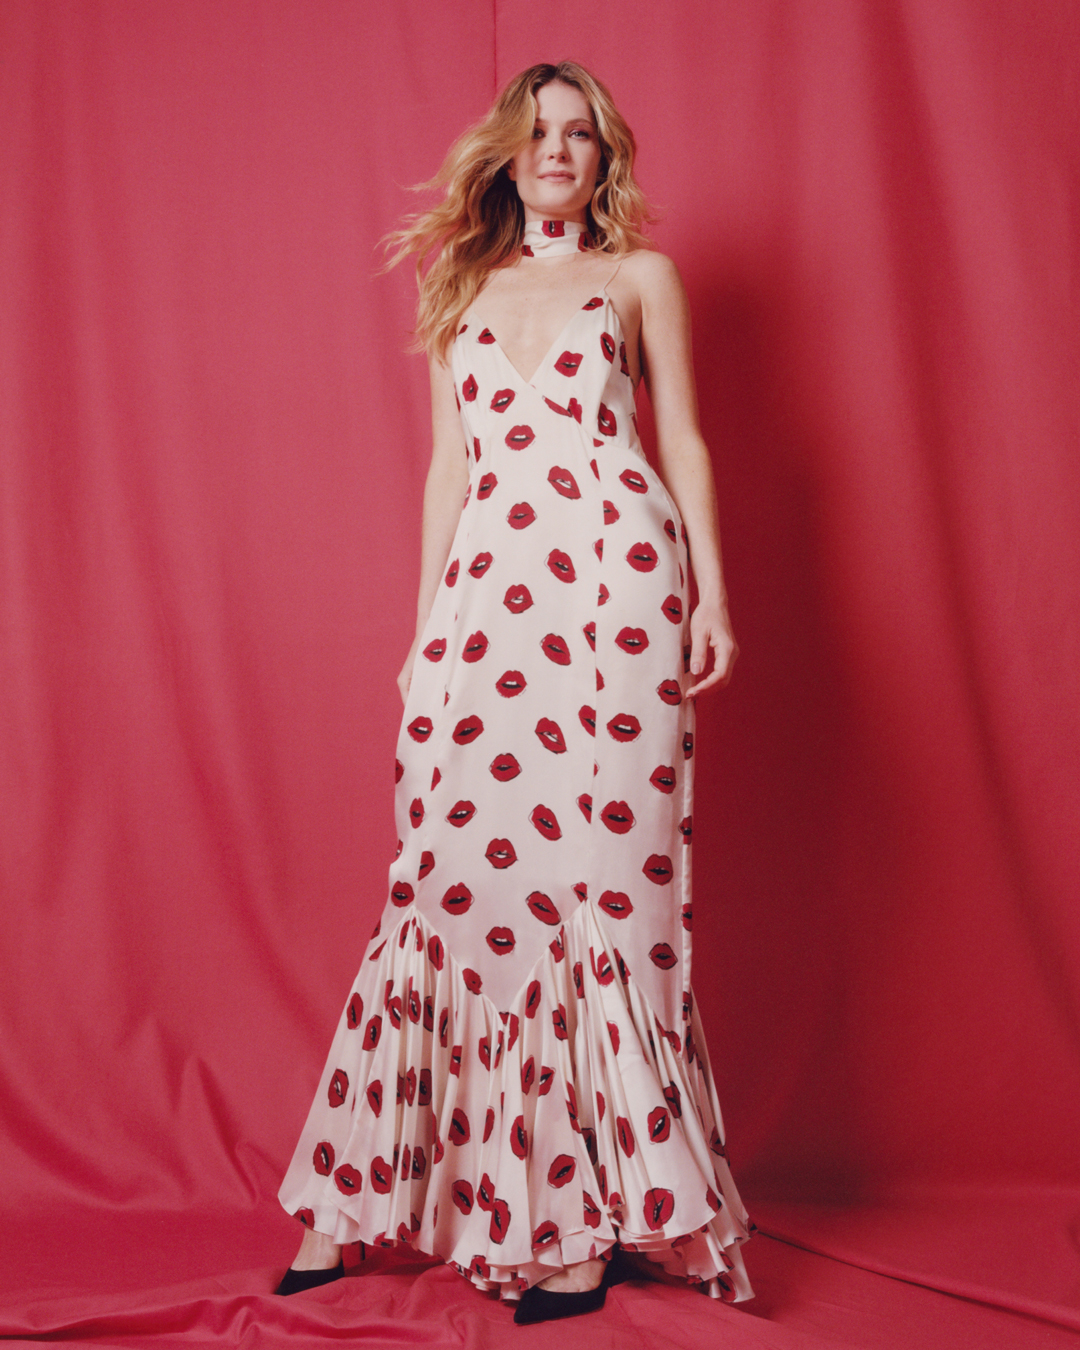 Meghann Fahy wearing a long dress with a kissing lips pattern for an editorial shoot